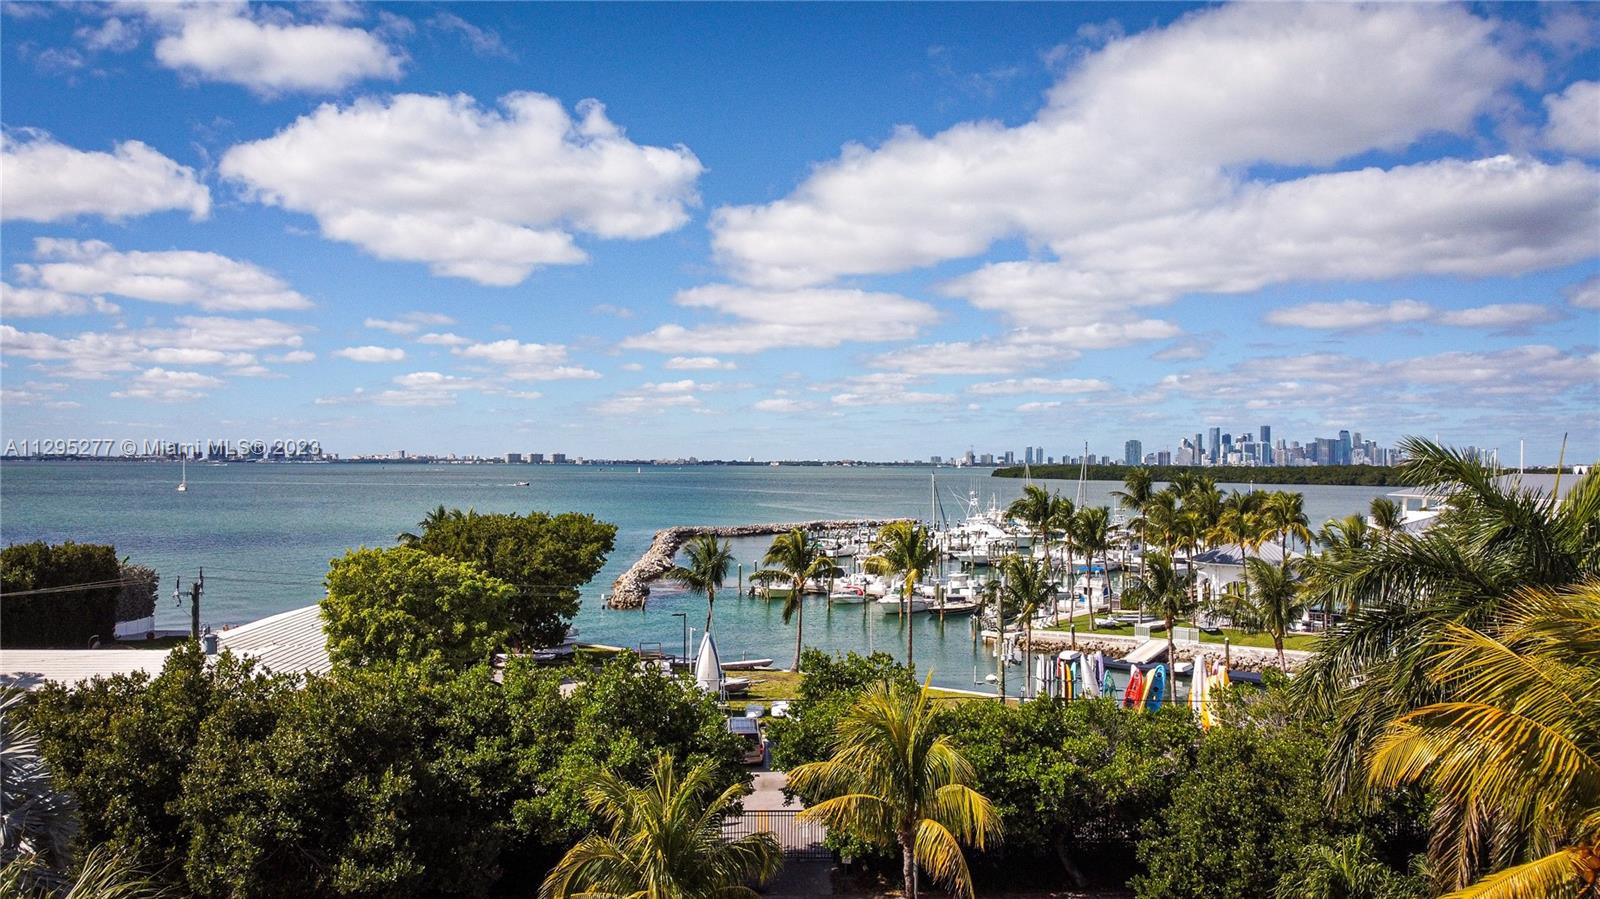 Located on exclusive & prestigious Harbor Dr. 1 of only 8 properties located directly facing Key Biscayne Yacht Club. 
Fully renovated: floors, baths, kitchen, brand new high impact doors & windows. 10 ft elevated. 
Upper level: High ceilings, spacious and ideal Living & Dining Area with spectacular views to KB Yacht Club & sunsets. OPEN VIEWS! Half bath. Master bedroom with walk in closet, bathroom with double sinks, shower & bathtub. Luminous kitchen with lots of storage space & dine in area. 5th Bedroom/Office.
Lower Level: 3 spacious & bright bedrooms. 3 renovated full bathrooms. Laundry room with direct access. Family room with access to the pool & barbeque area. 
Exterior: Covered terrace. With barbeque & bar area. Integrated pool & barbeque area on the same level.